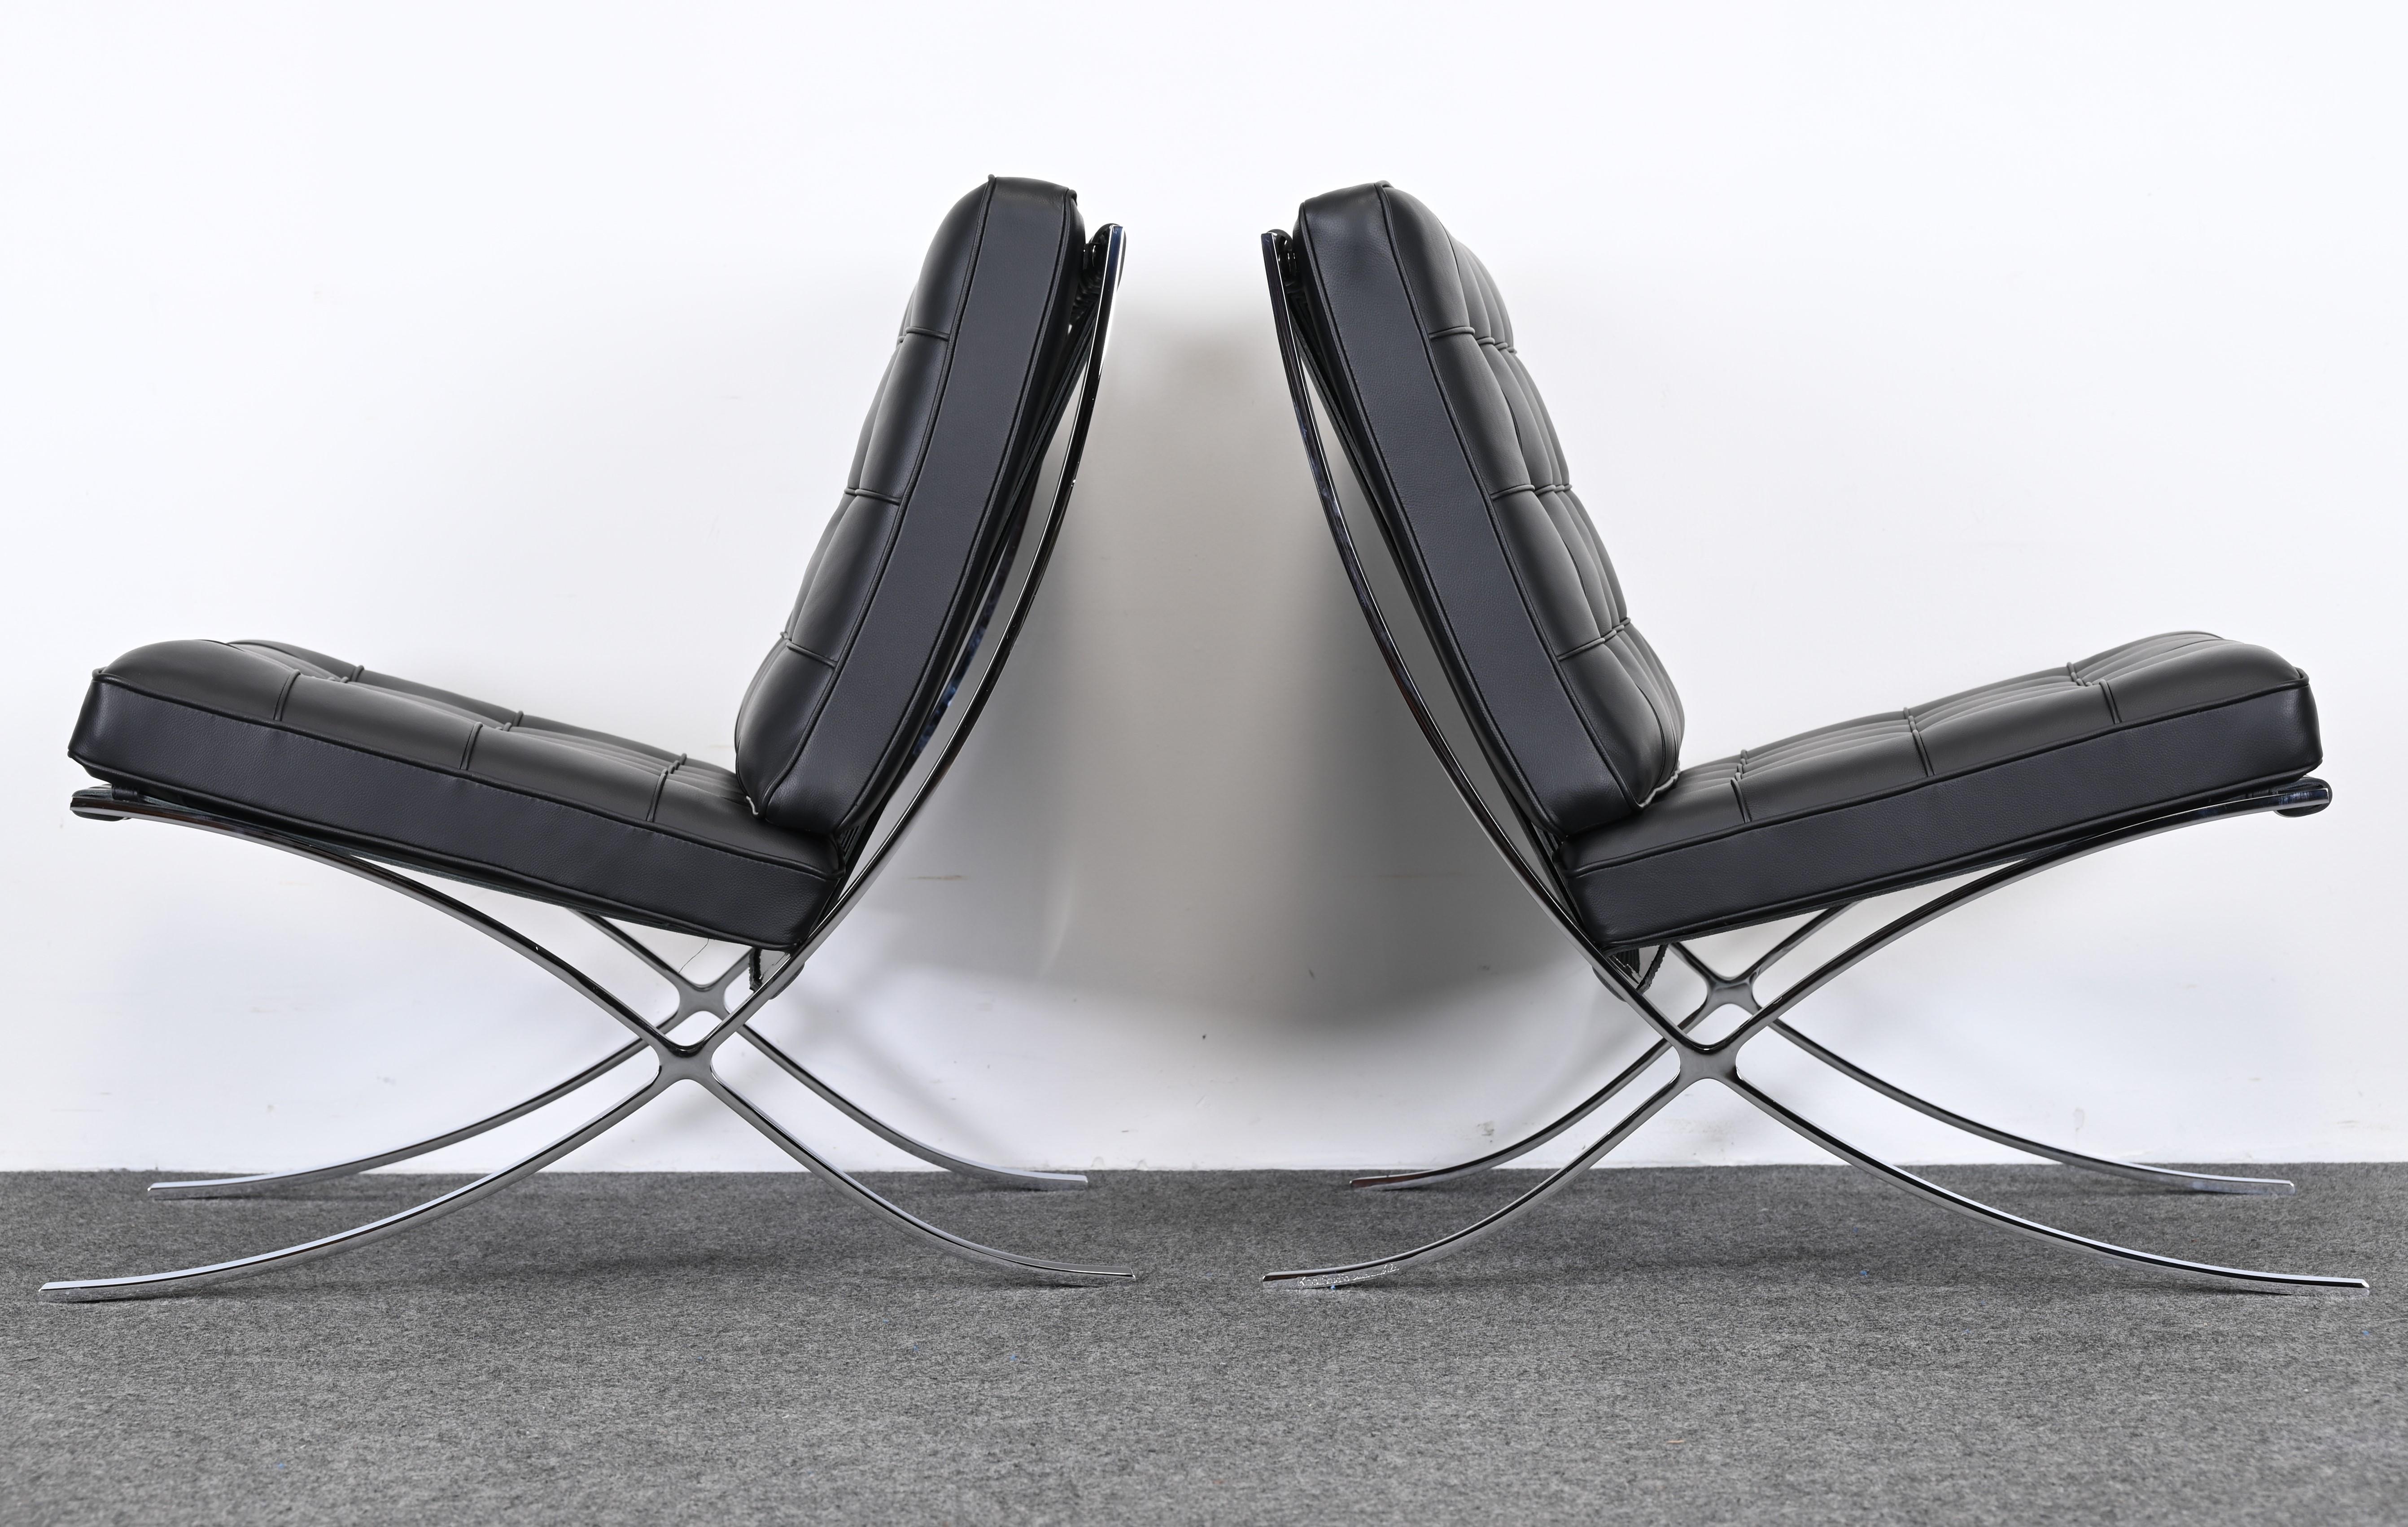 Contemporary Pair of Ludwig Mies van der Rohe Barcelona Chairs for Knoll Studio